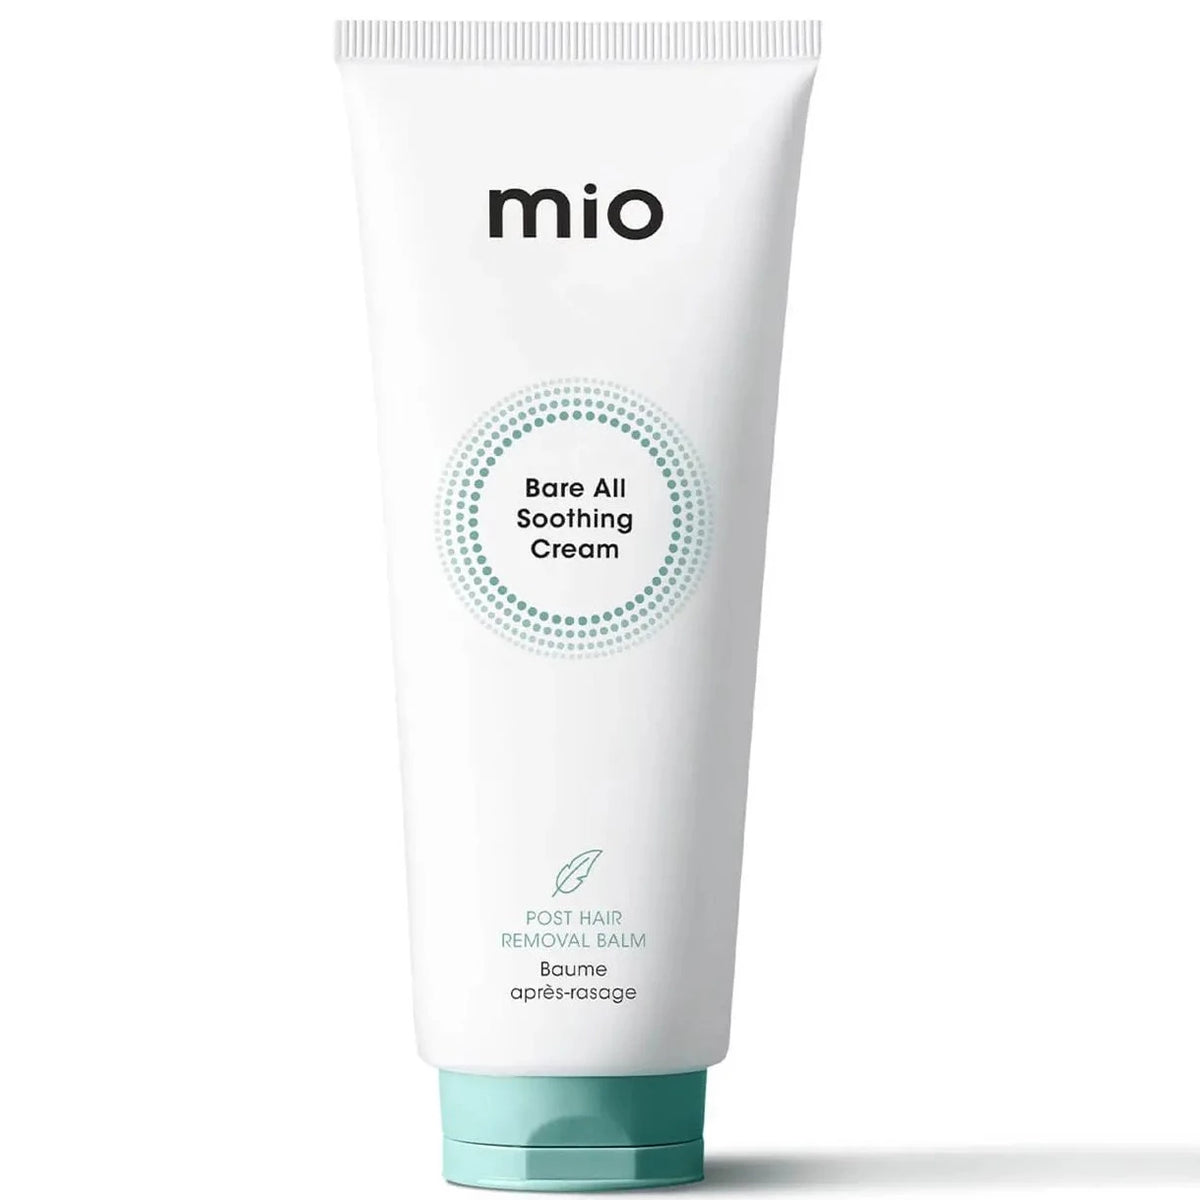 Mio Skincare Bare All Soothing Cream - Post Hair Removal Balm, 100ml